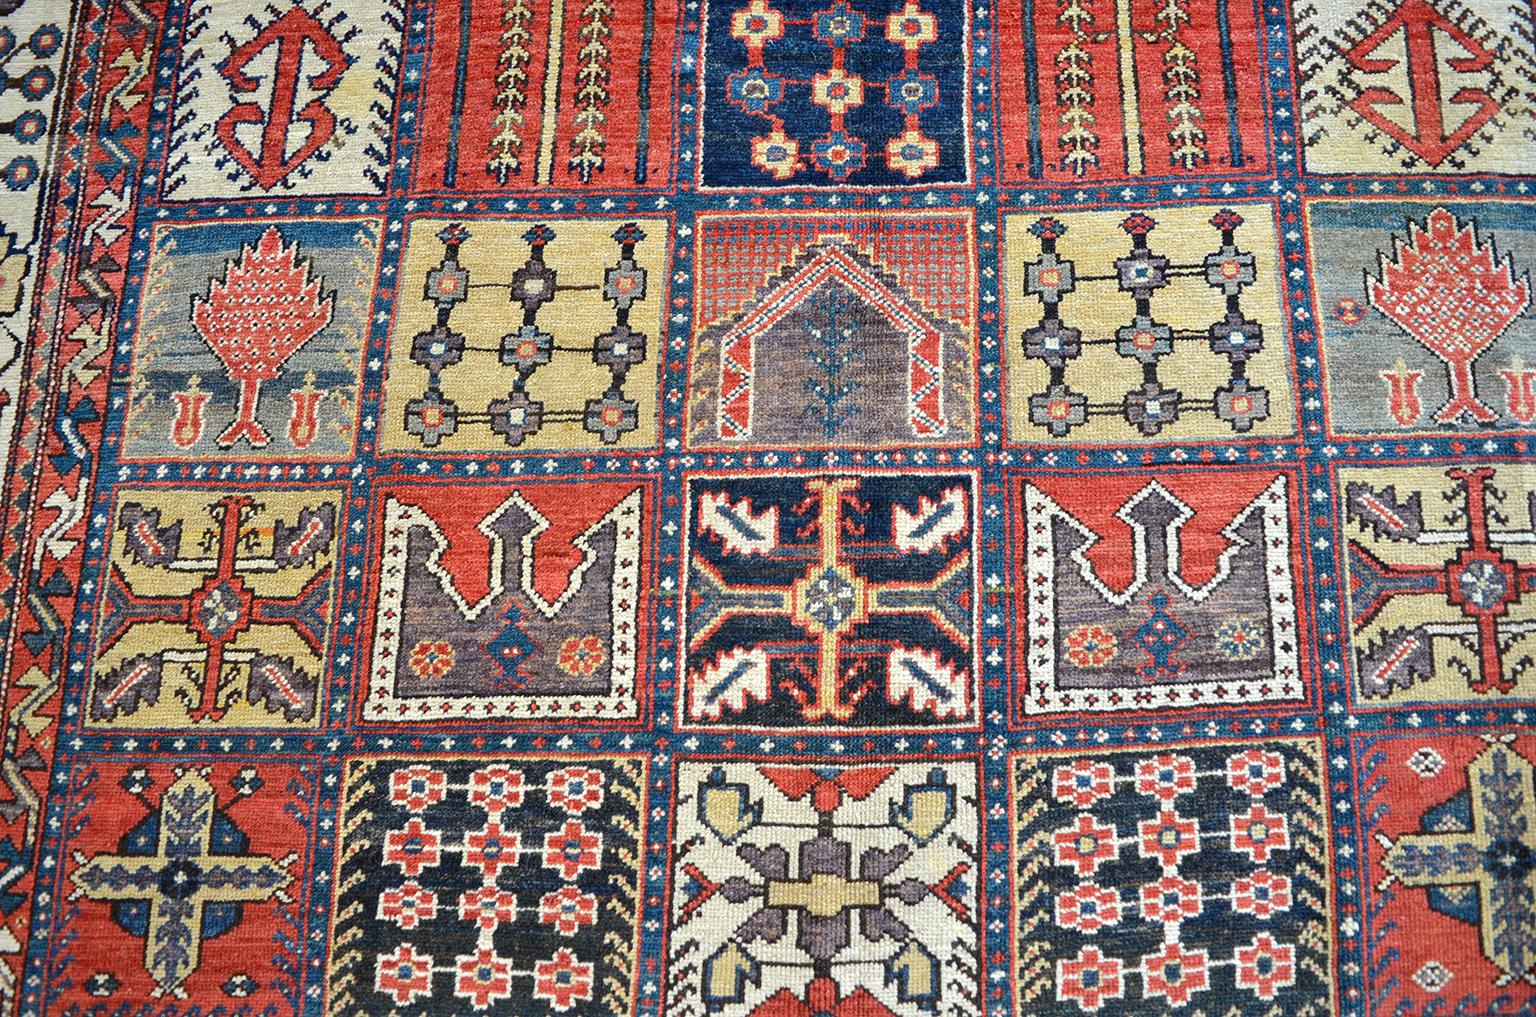 Vegetable Dyed Antique 1900s Wool Persian Bakhtiari Rug by Olad, Garden Motif, 7' x 13' For Sale